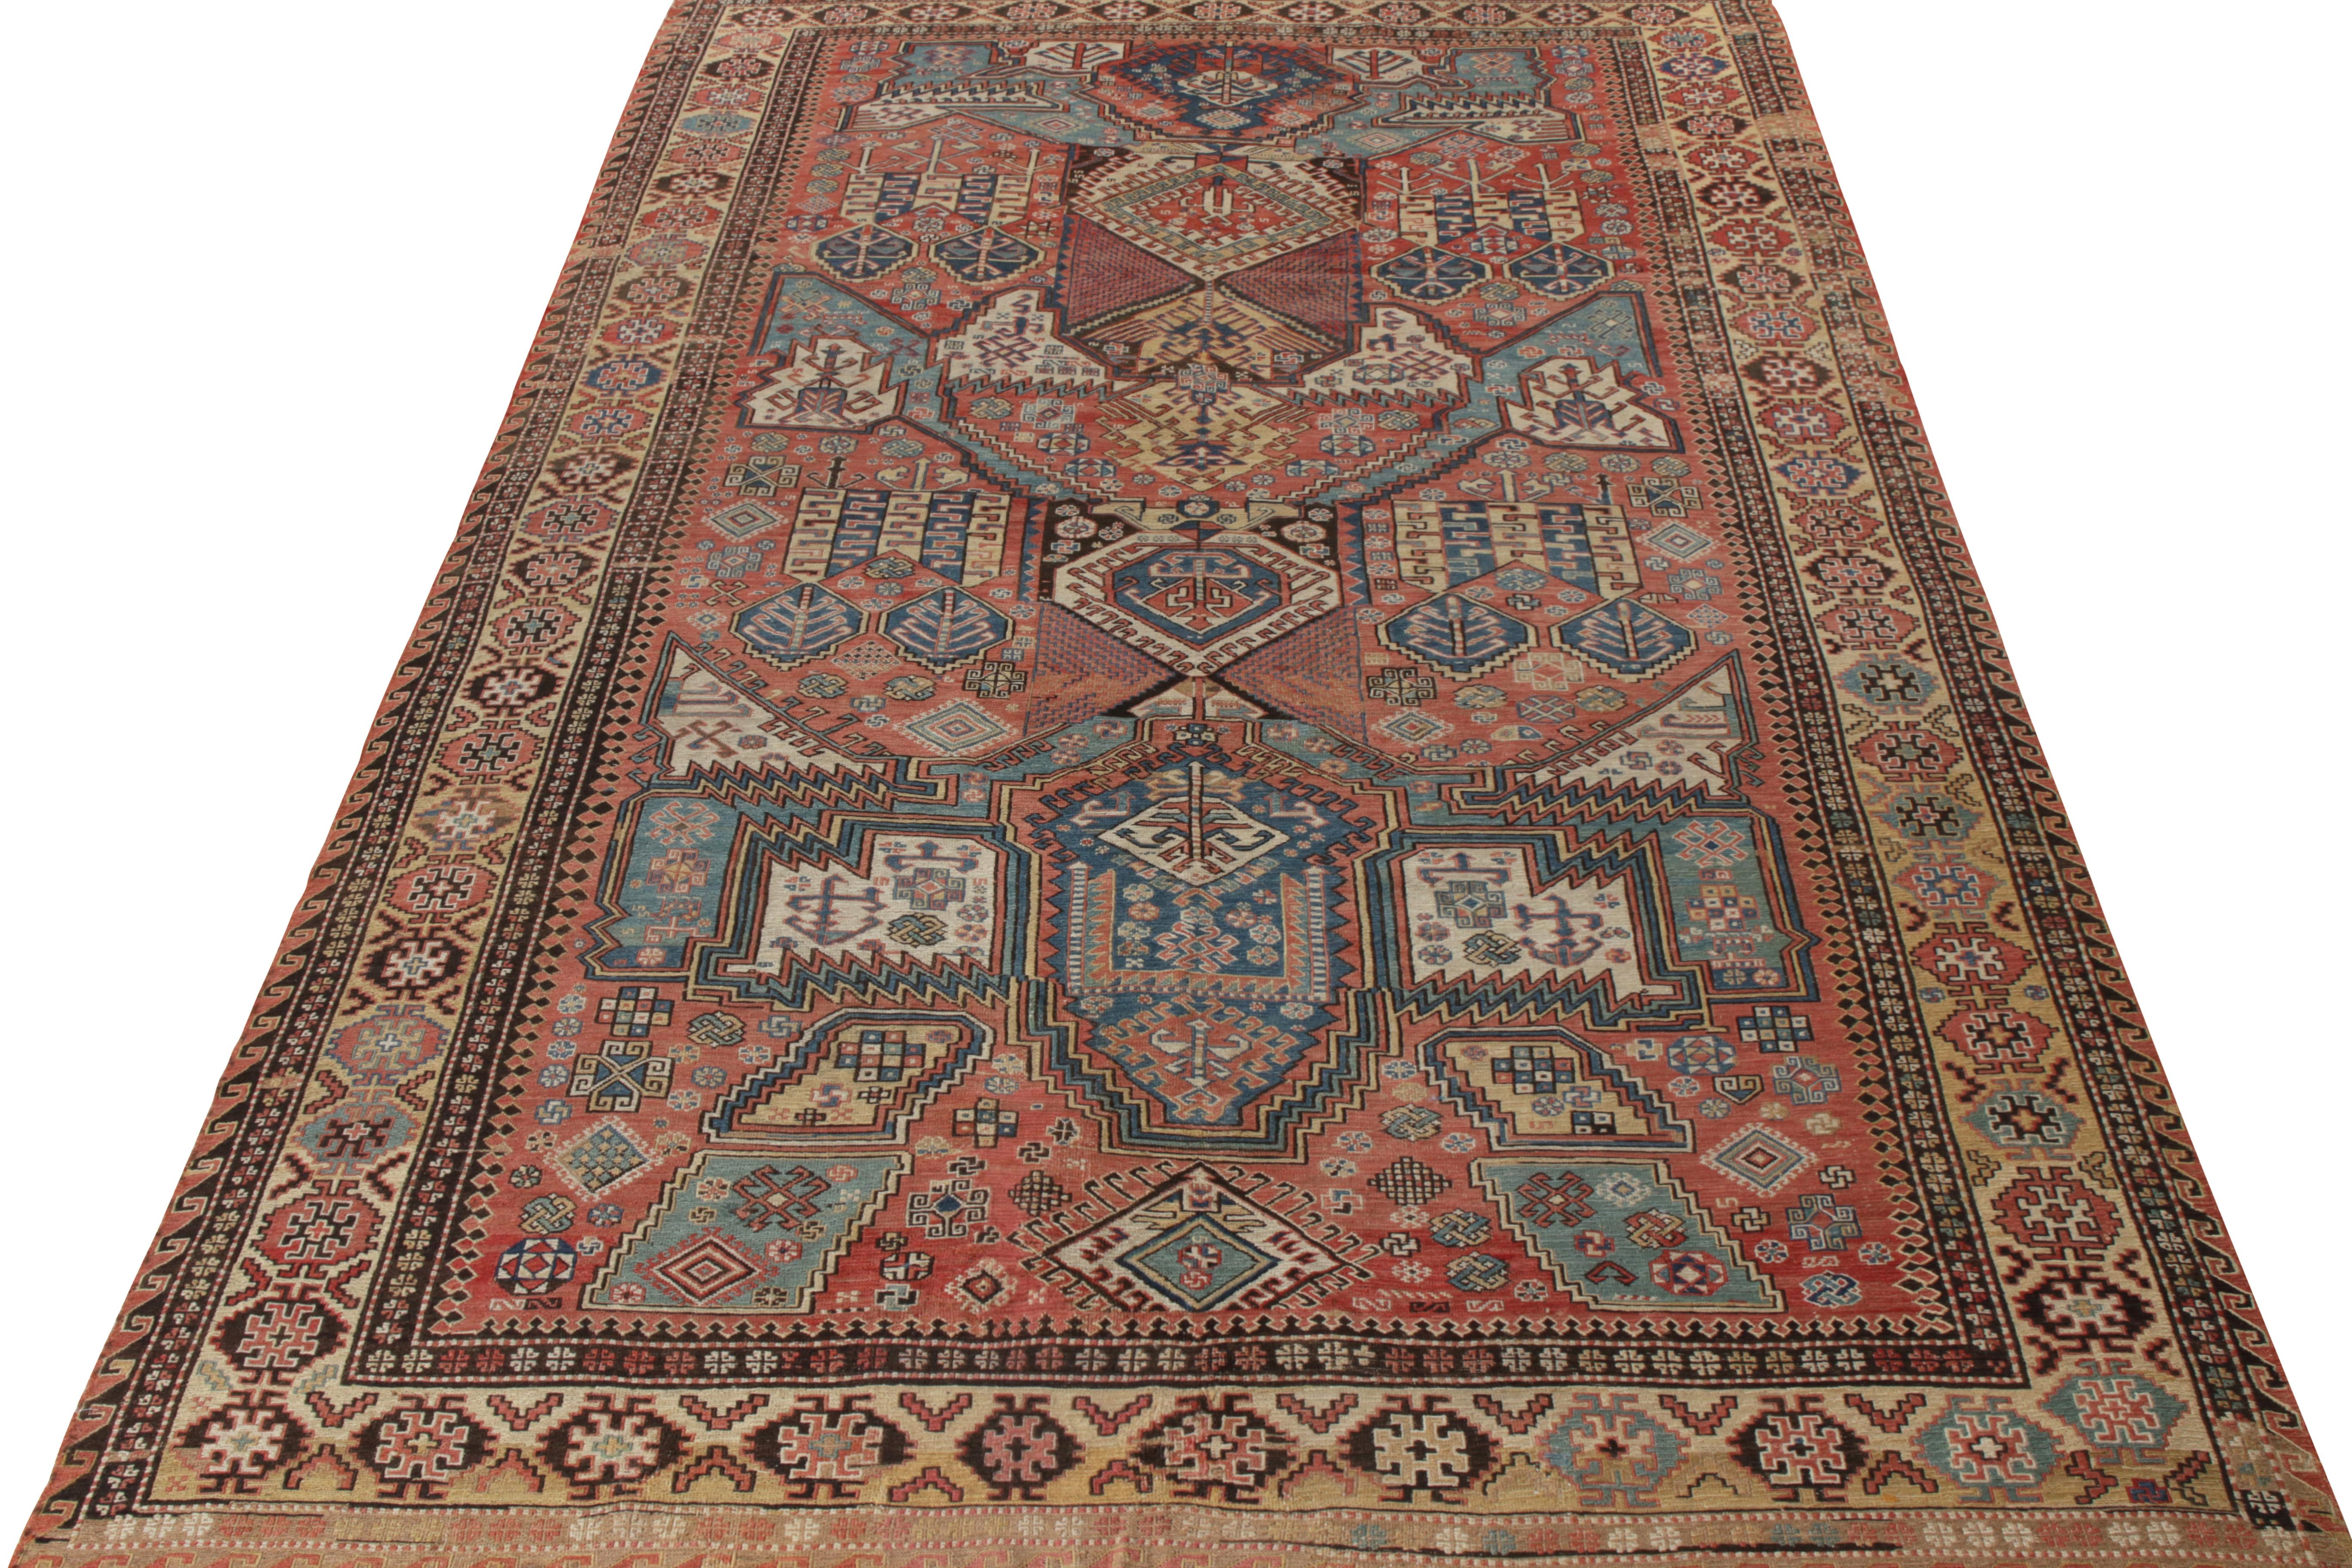 Hand knotted in wool, a rare antique dragon Soumak rug originating from Russia circa 1920-1930, relishing a union of a sought-after blue, beige-brown, and red colorway with a well defined geometric pattern filling the scale with a traditional